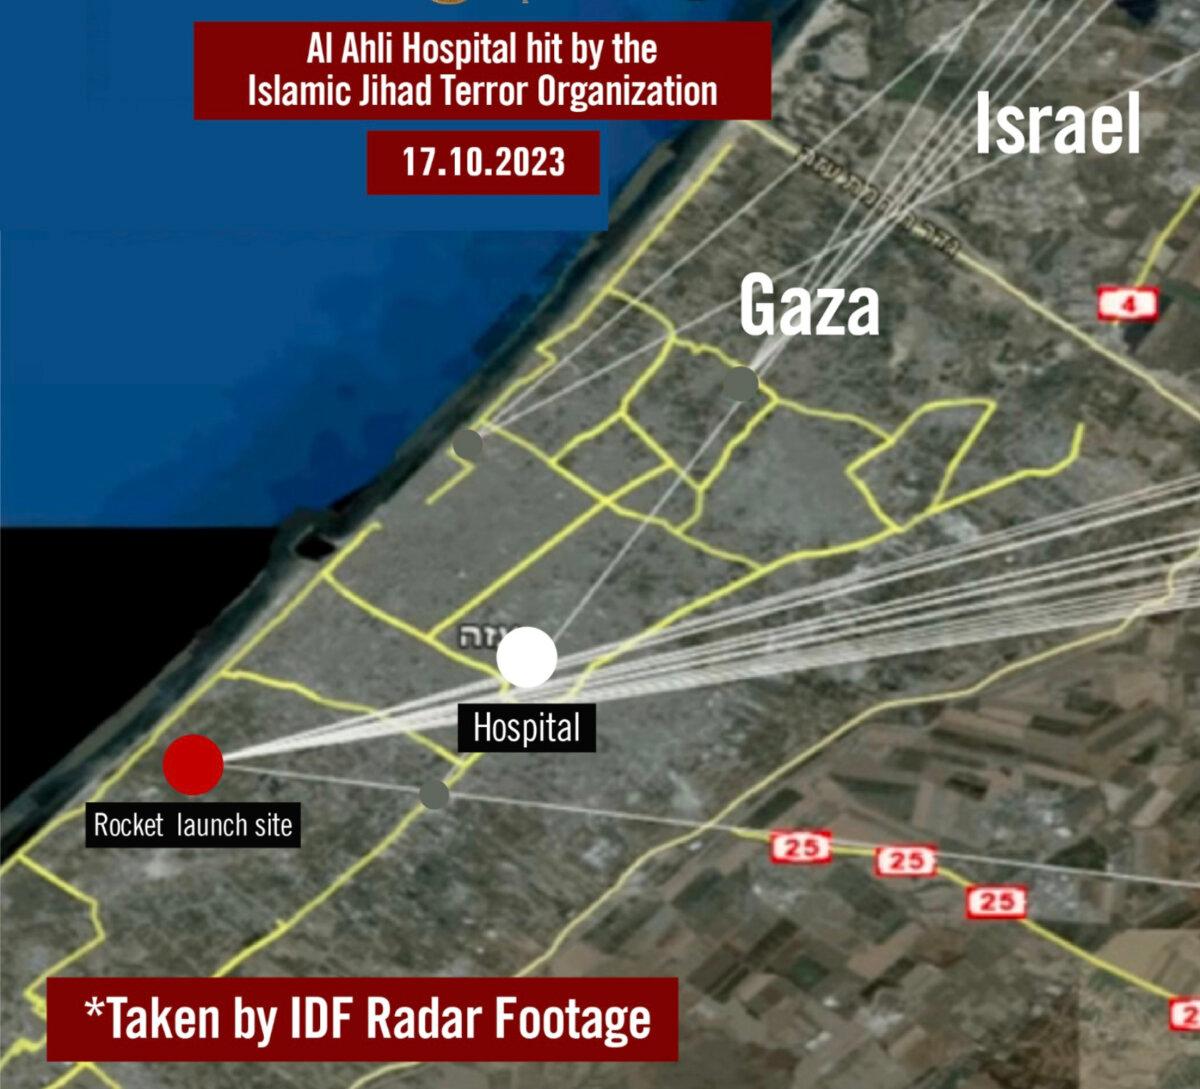 A graphic shared by the Israel Defence Forces (IDF) showing the trajectories of rocket attacks from Gaza against Israel, with the location of the al-Ahli hospital in Gaza that was rocked by an explosion seen in the direct line of fire, on Oct. 17, 2023. (IDF)